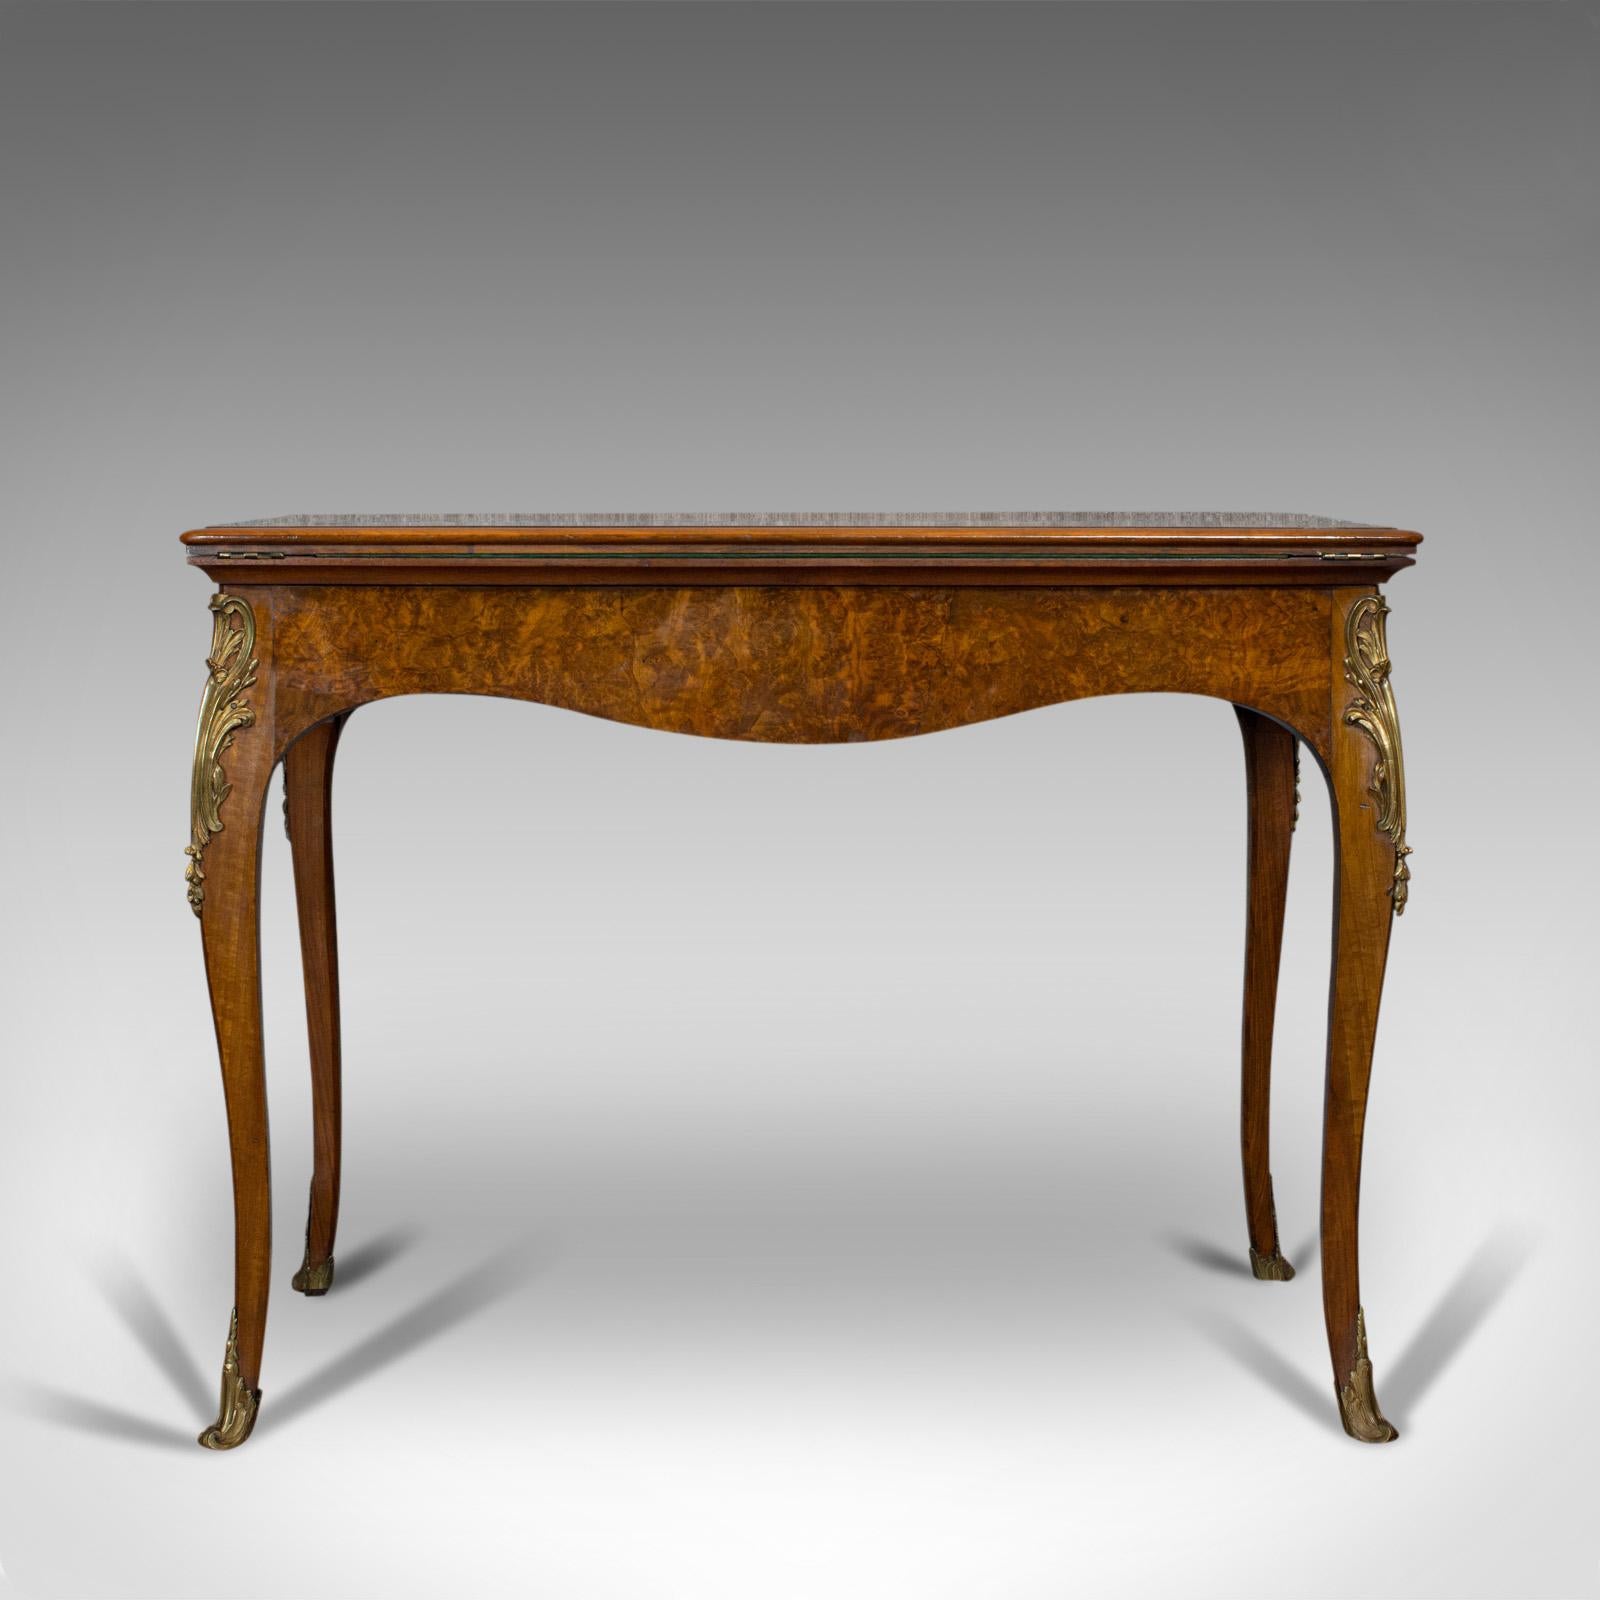 Antique Card Table, French, Burr Walnut, Fold over, Games, Victorian, circa 1870 In Good Condition For Sale In Hele, Devon, GB